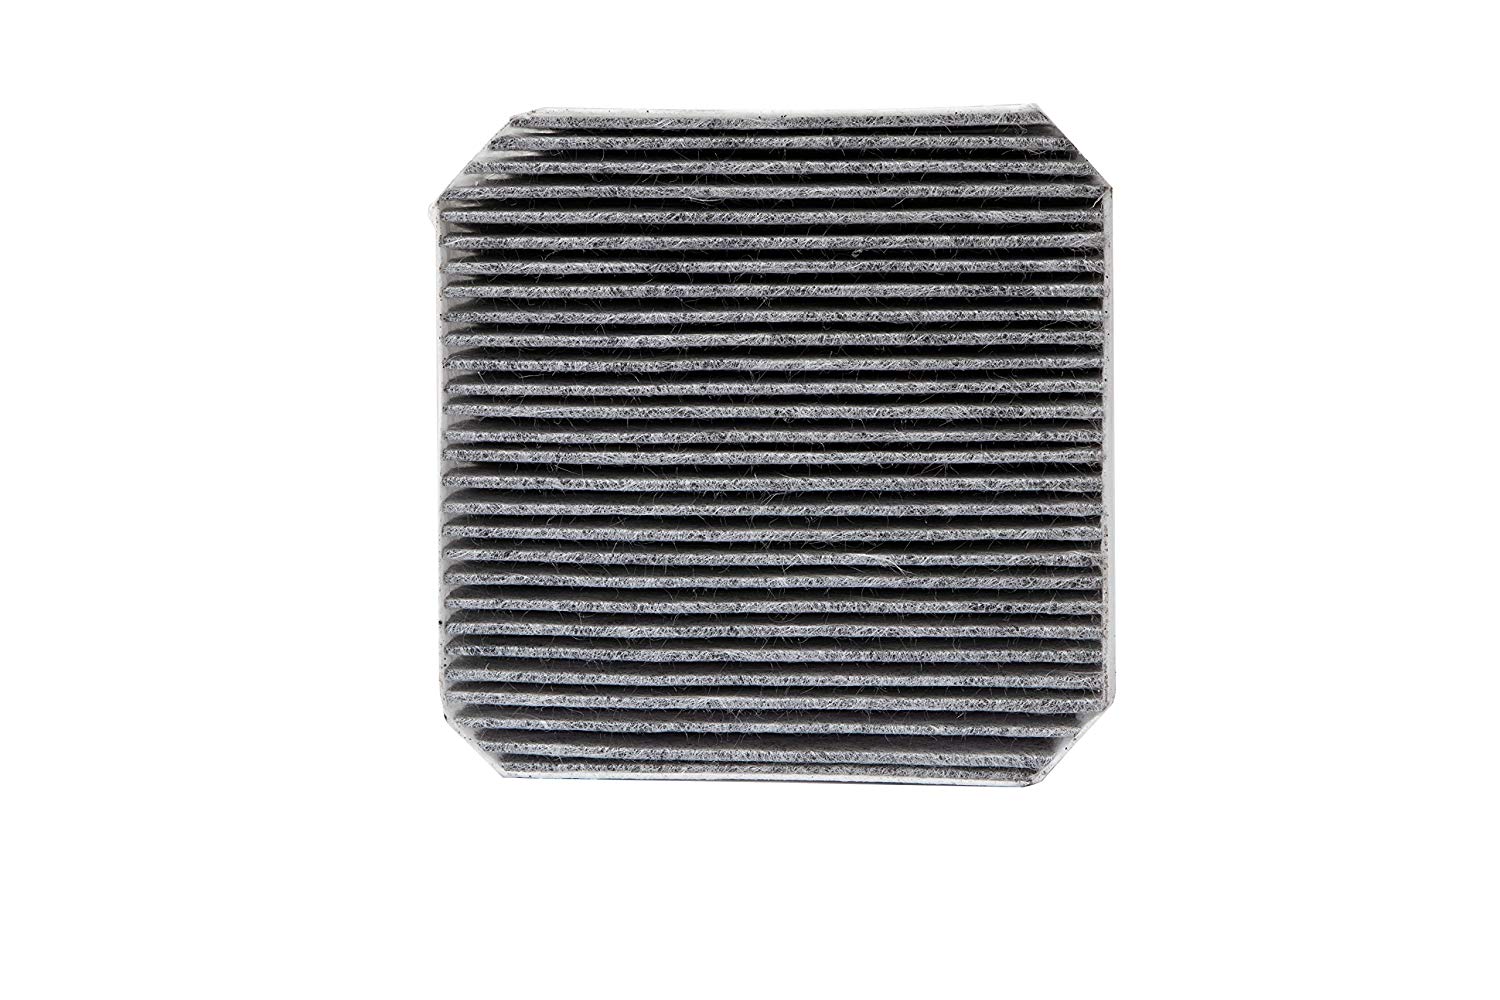 LifeSupplyUSA 10 Pack Replacement HEPA Pre-Filter Compatible with Gray Version 2.1 fits Molekule Air Cleaner Purifier